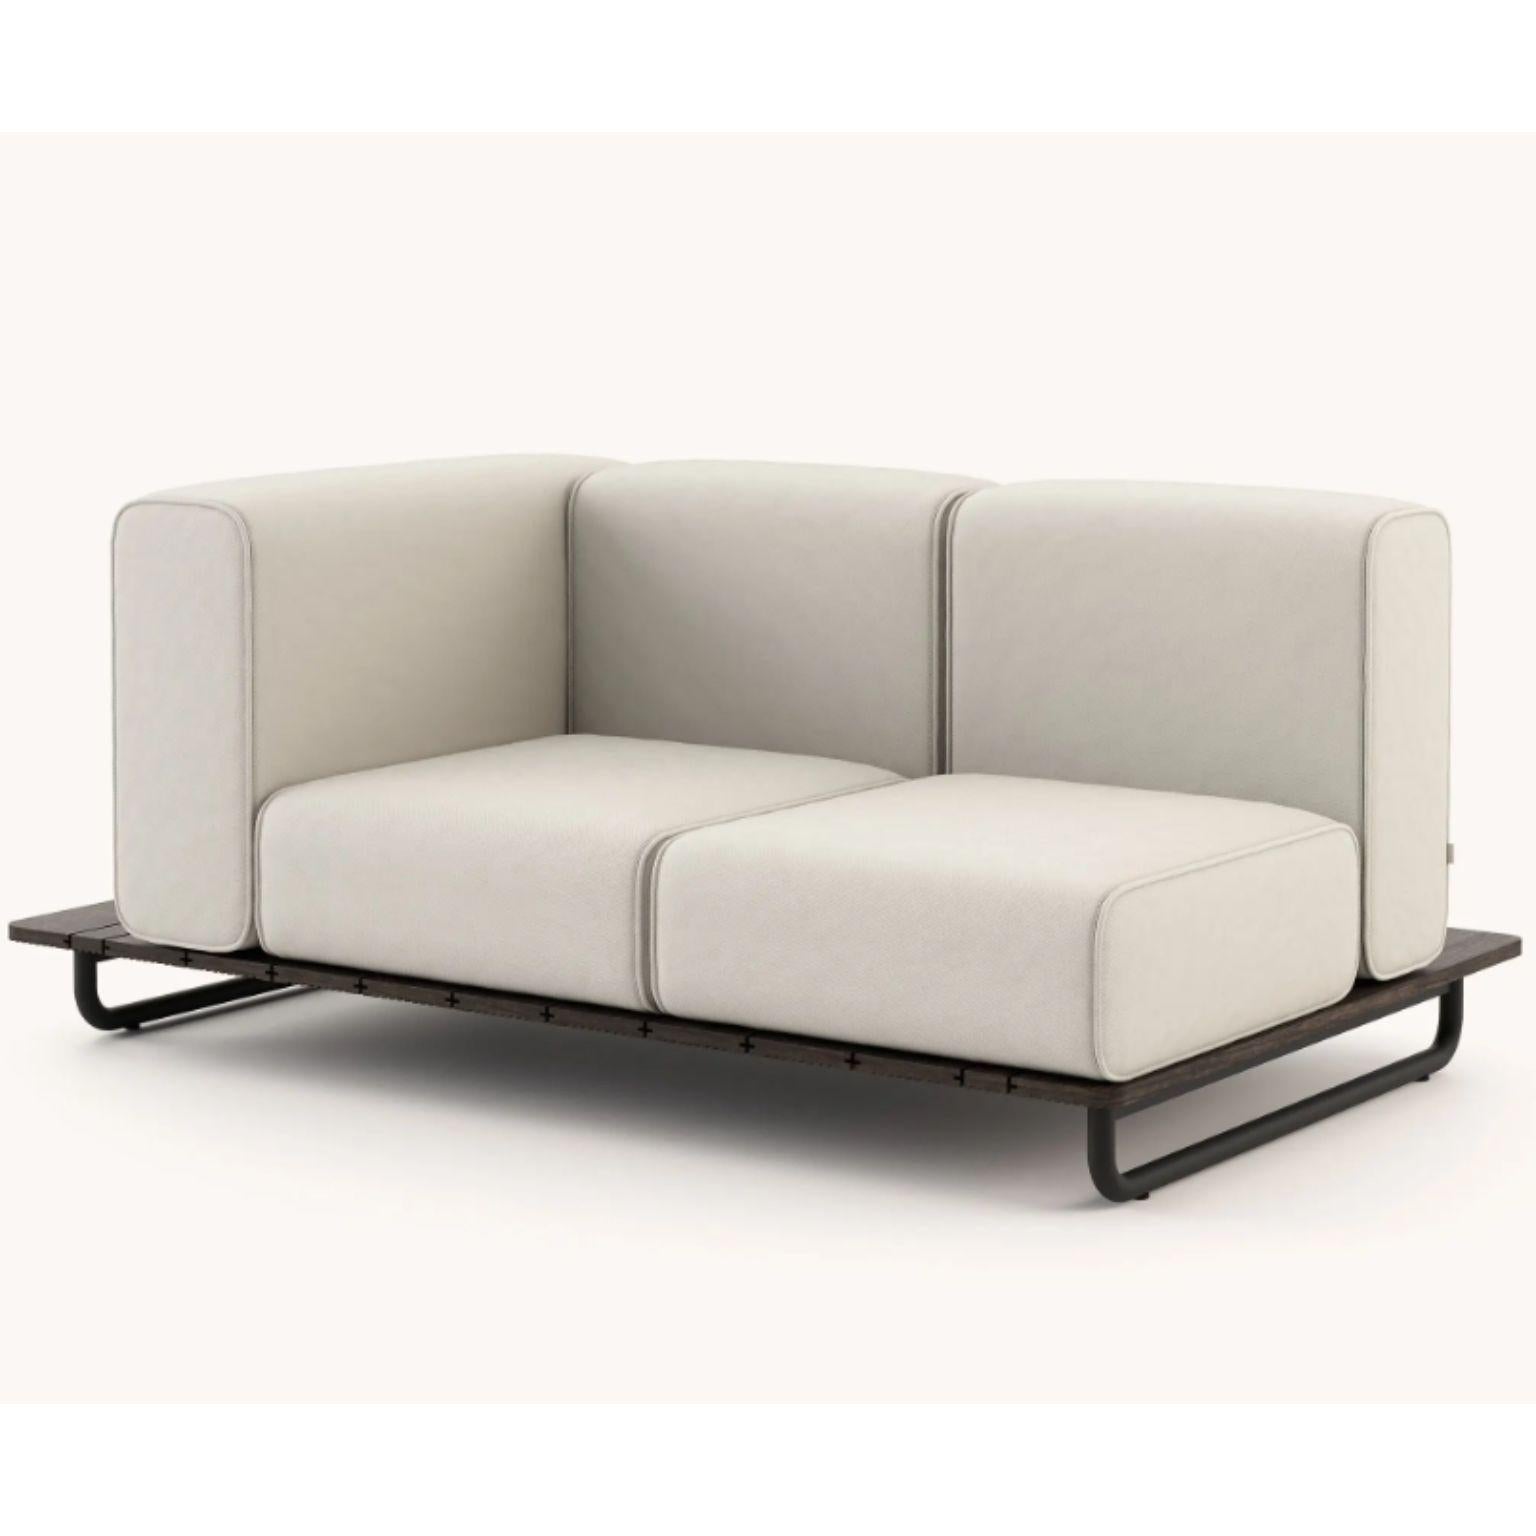 Copacabana sofa with 1 arm right by Domkapa
Materials: black texturized steel, bamboo wood, fabric (Rhine Ice).
Dimensions: W 165 x D 105 x H 75 cm.
Also available in different materials. 

Copacabana sofa with or without armrest is an